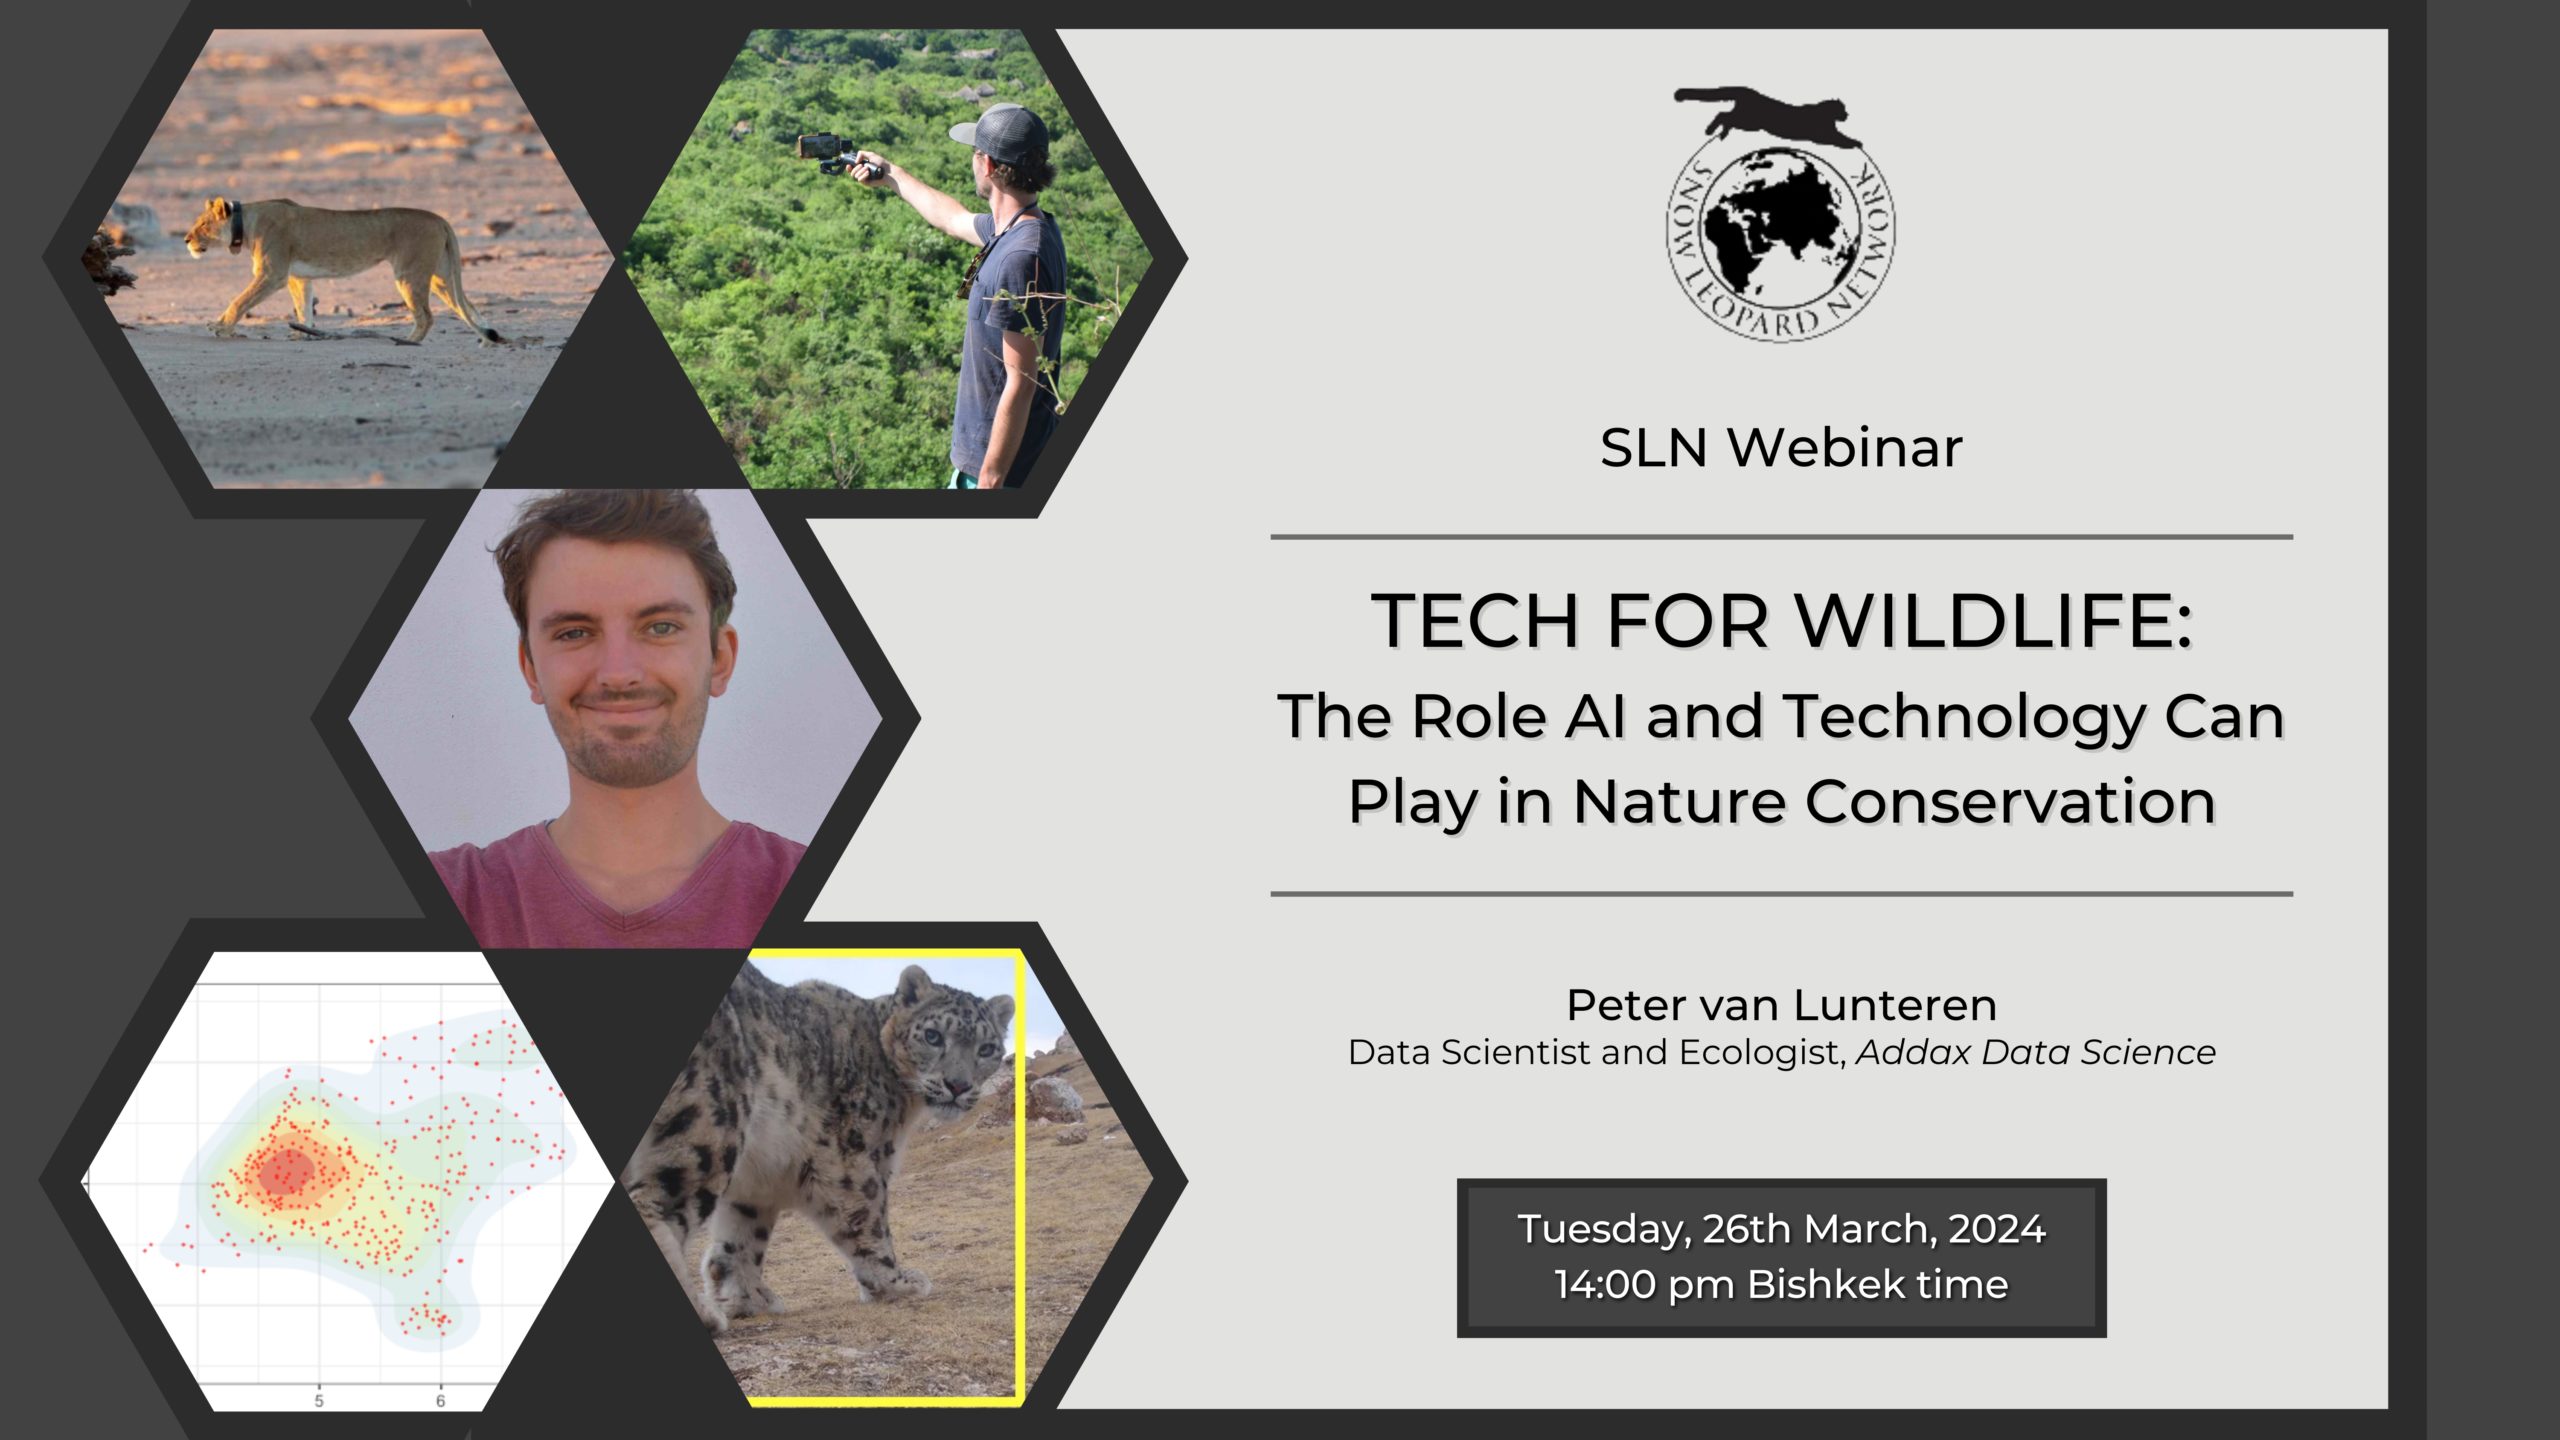 SLN Webinar: Tech for wildlife: The role AI and technology can play in nature conservation